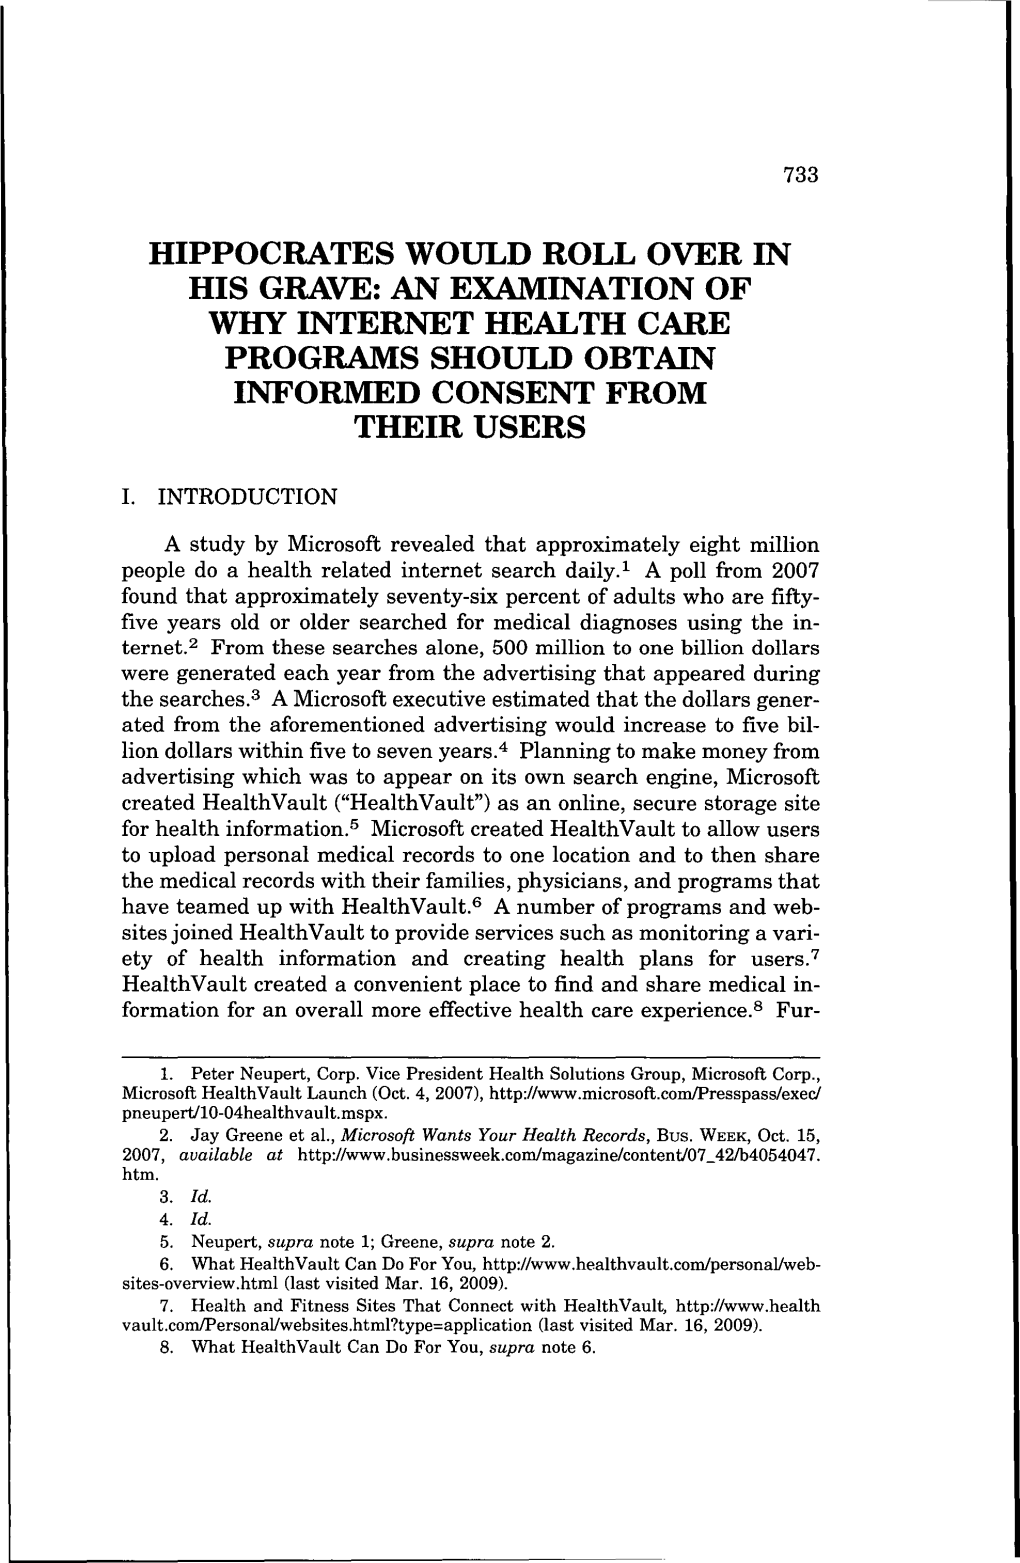 Hippocrates Would Roll Over in His Grave: an Examination of Why Internet Health Care Programsshouldobtmn Informed Consent from Their Users